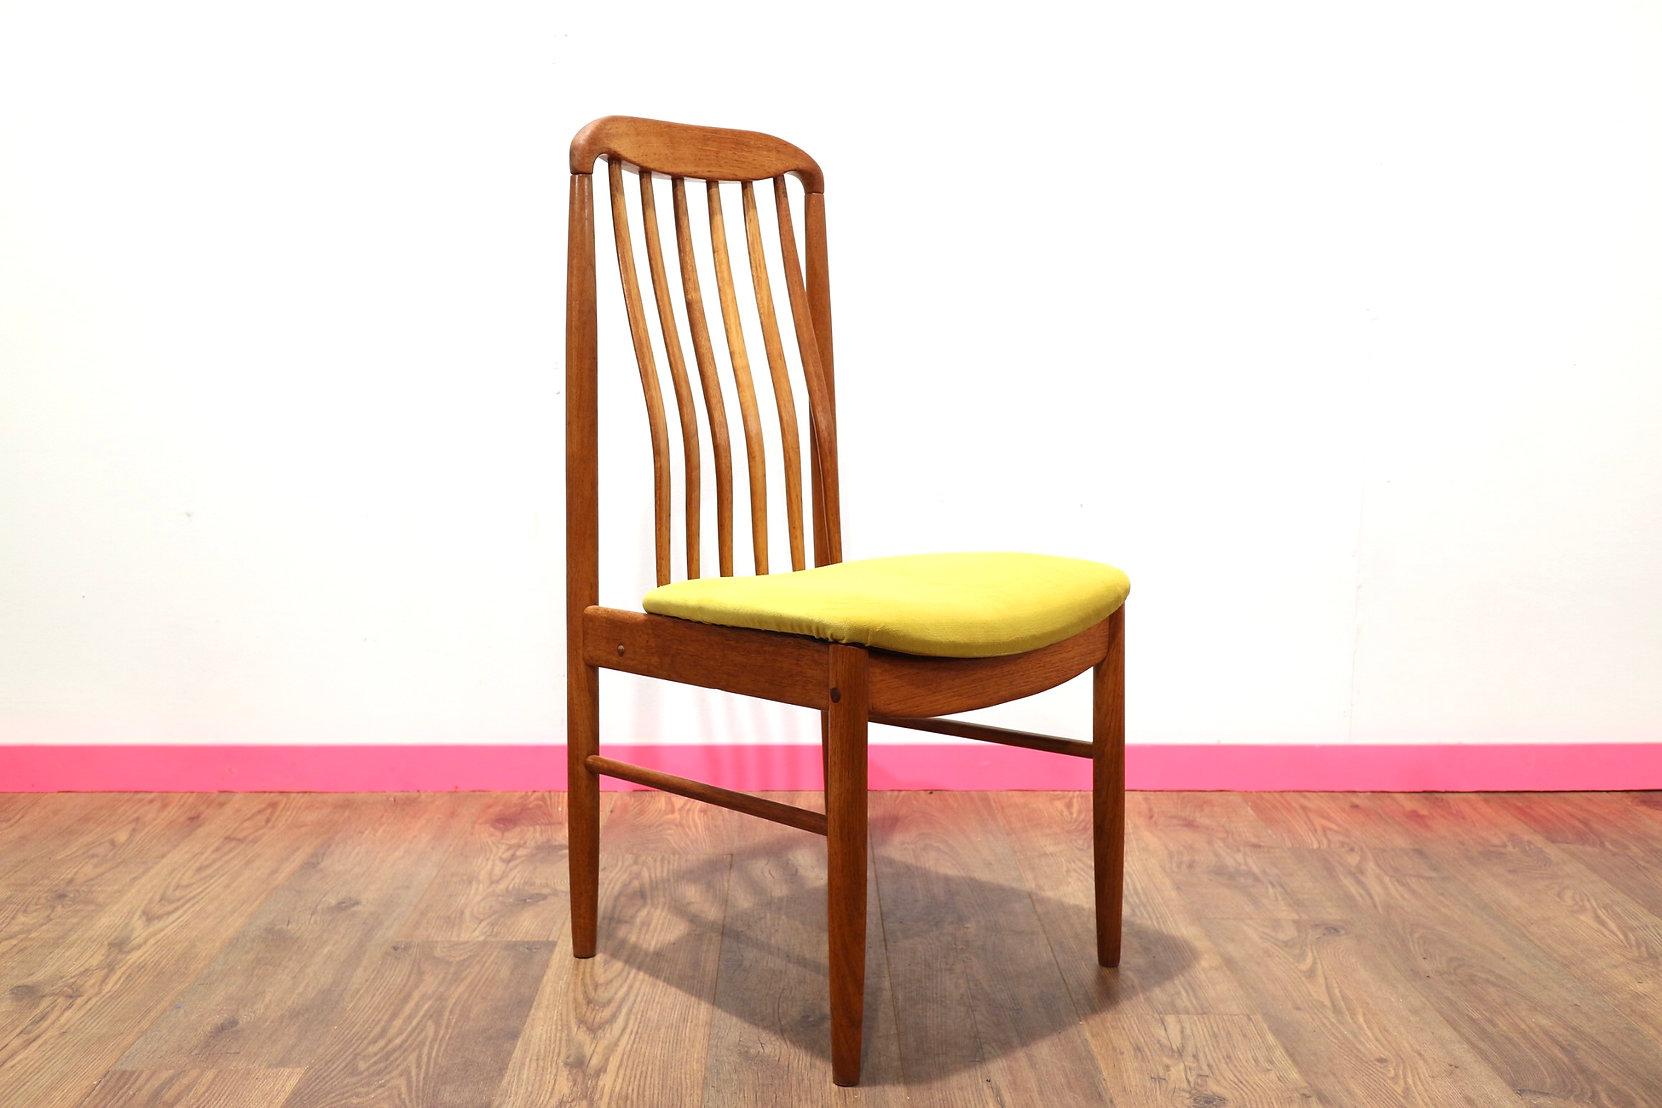 A gorgeous set of 4 x Danish design dining chairs made by Benni Linden. These chairs have fantastic lines and the back supports which look amazing. The seat pads have recently ben reupholstered in yellow and really set the chairs off. The set